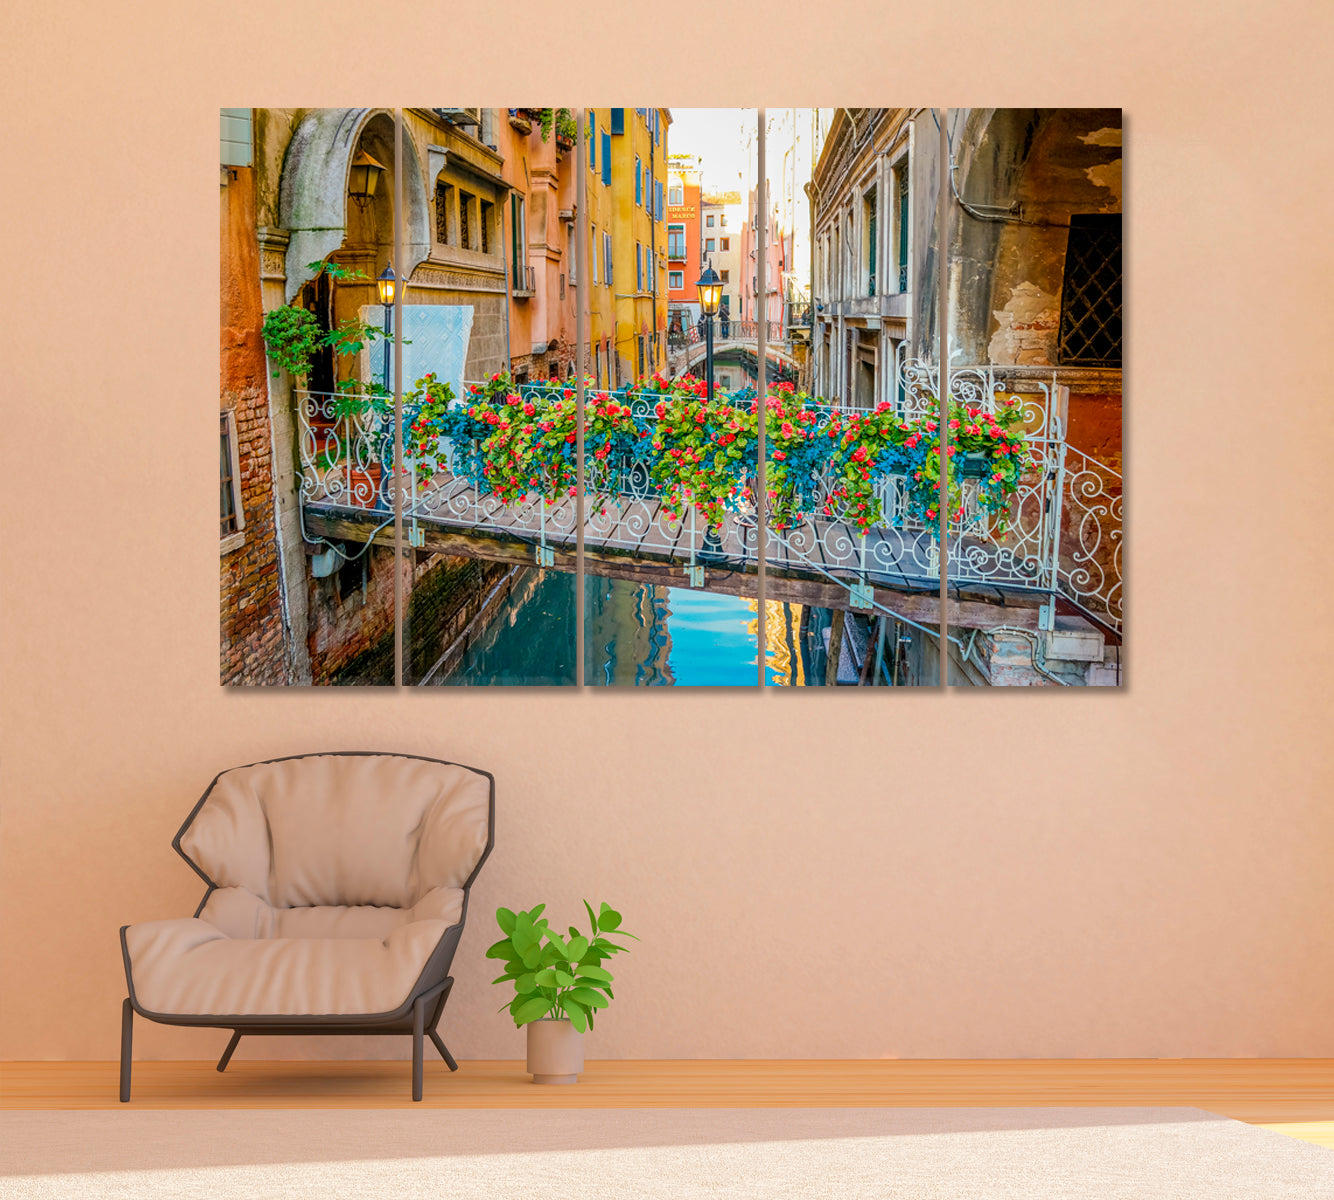 Venice Italy Canvas Print ArtLexy 5 Panels 36"x24" inches 